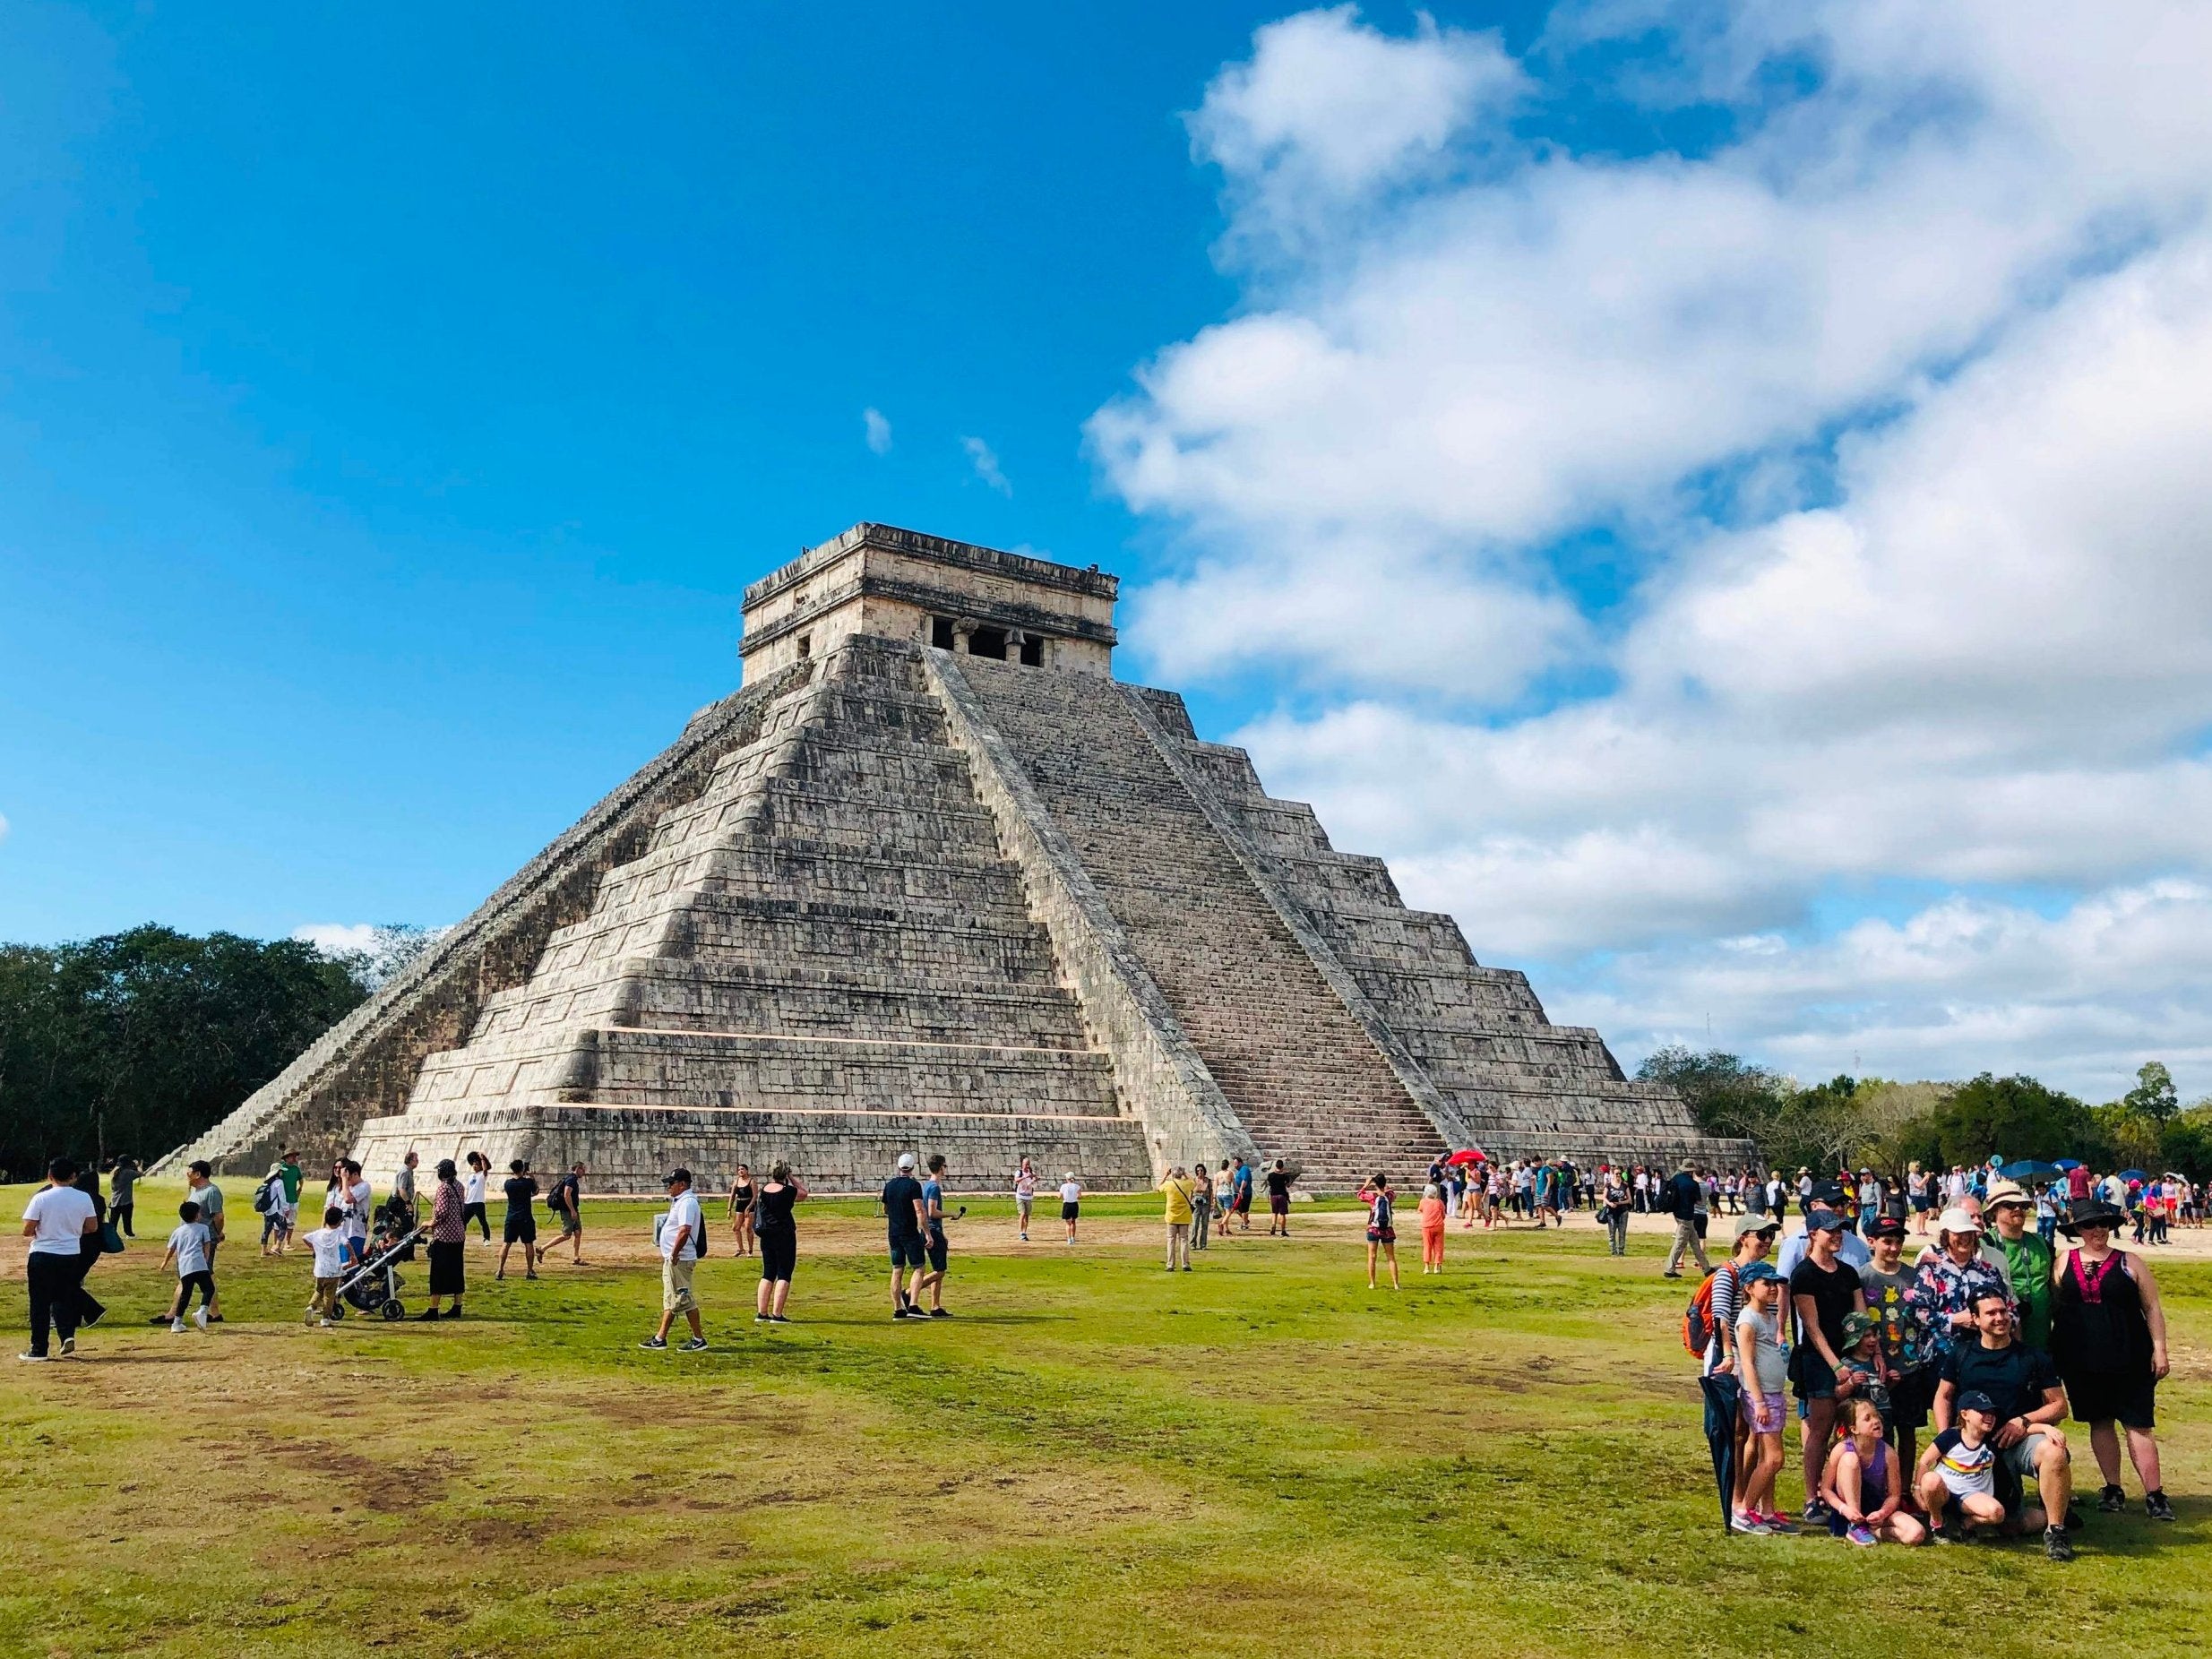 Kukulcan Pyramid at the Mayan archaeological site of Chichen Itza